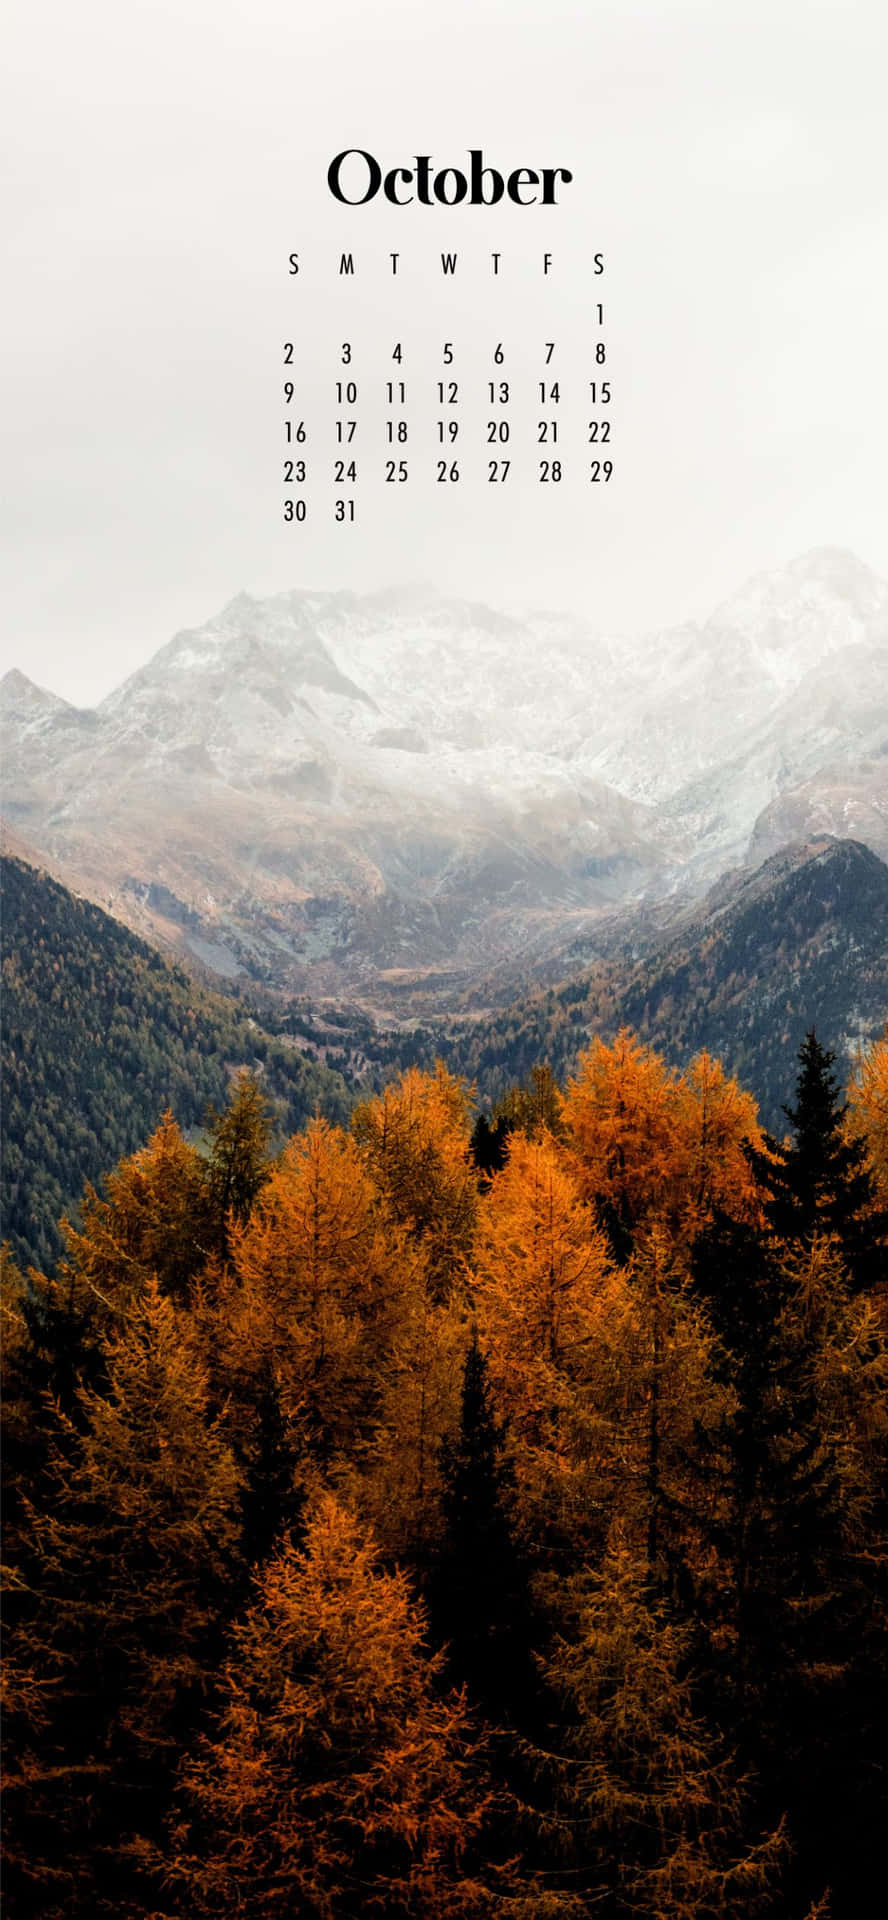 October Wallpaper With Trees And Mountains Wallpaper